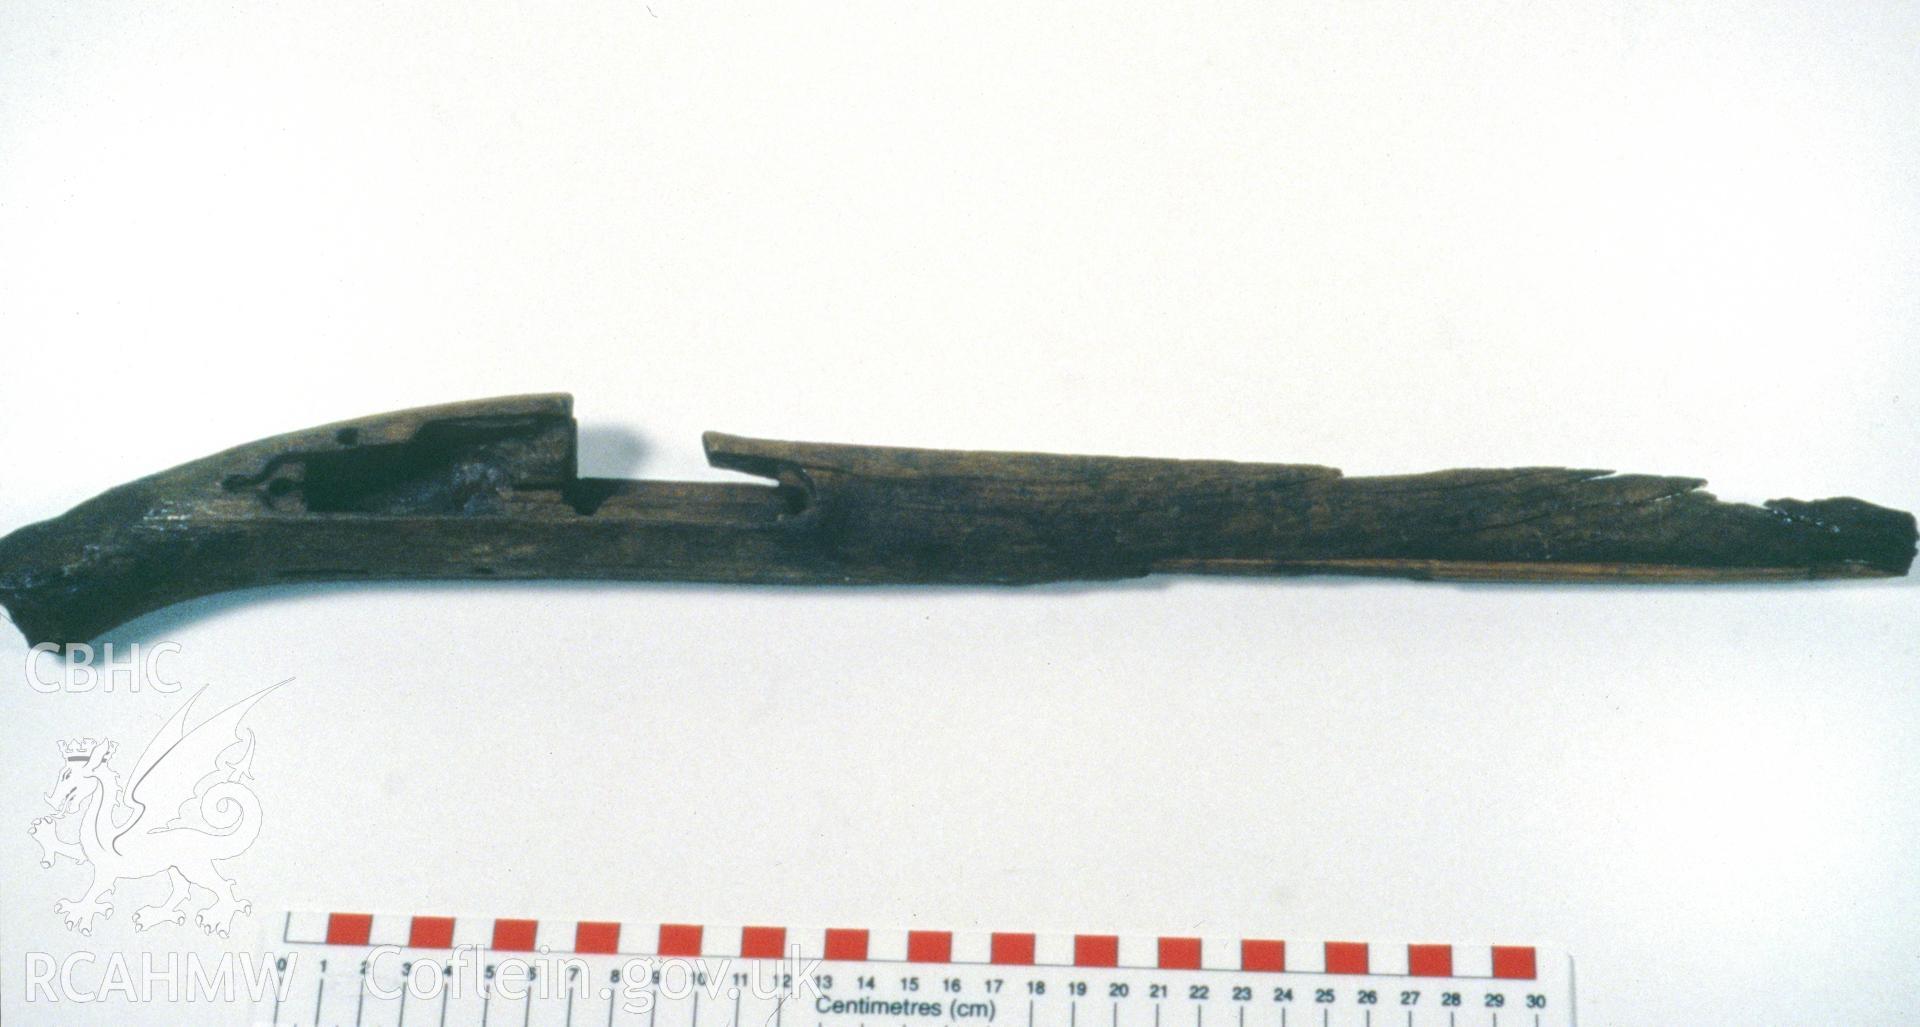 Colour slide showing find from site, wooden musket stock, from a survey of the Mary designated shipwreck, courtesy of National Museums, Liverpool (Merseyside Maritime Museum)